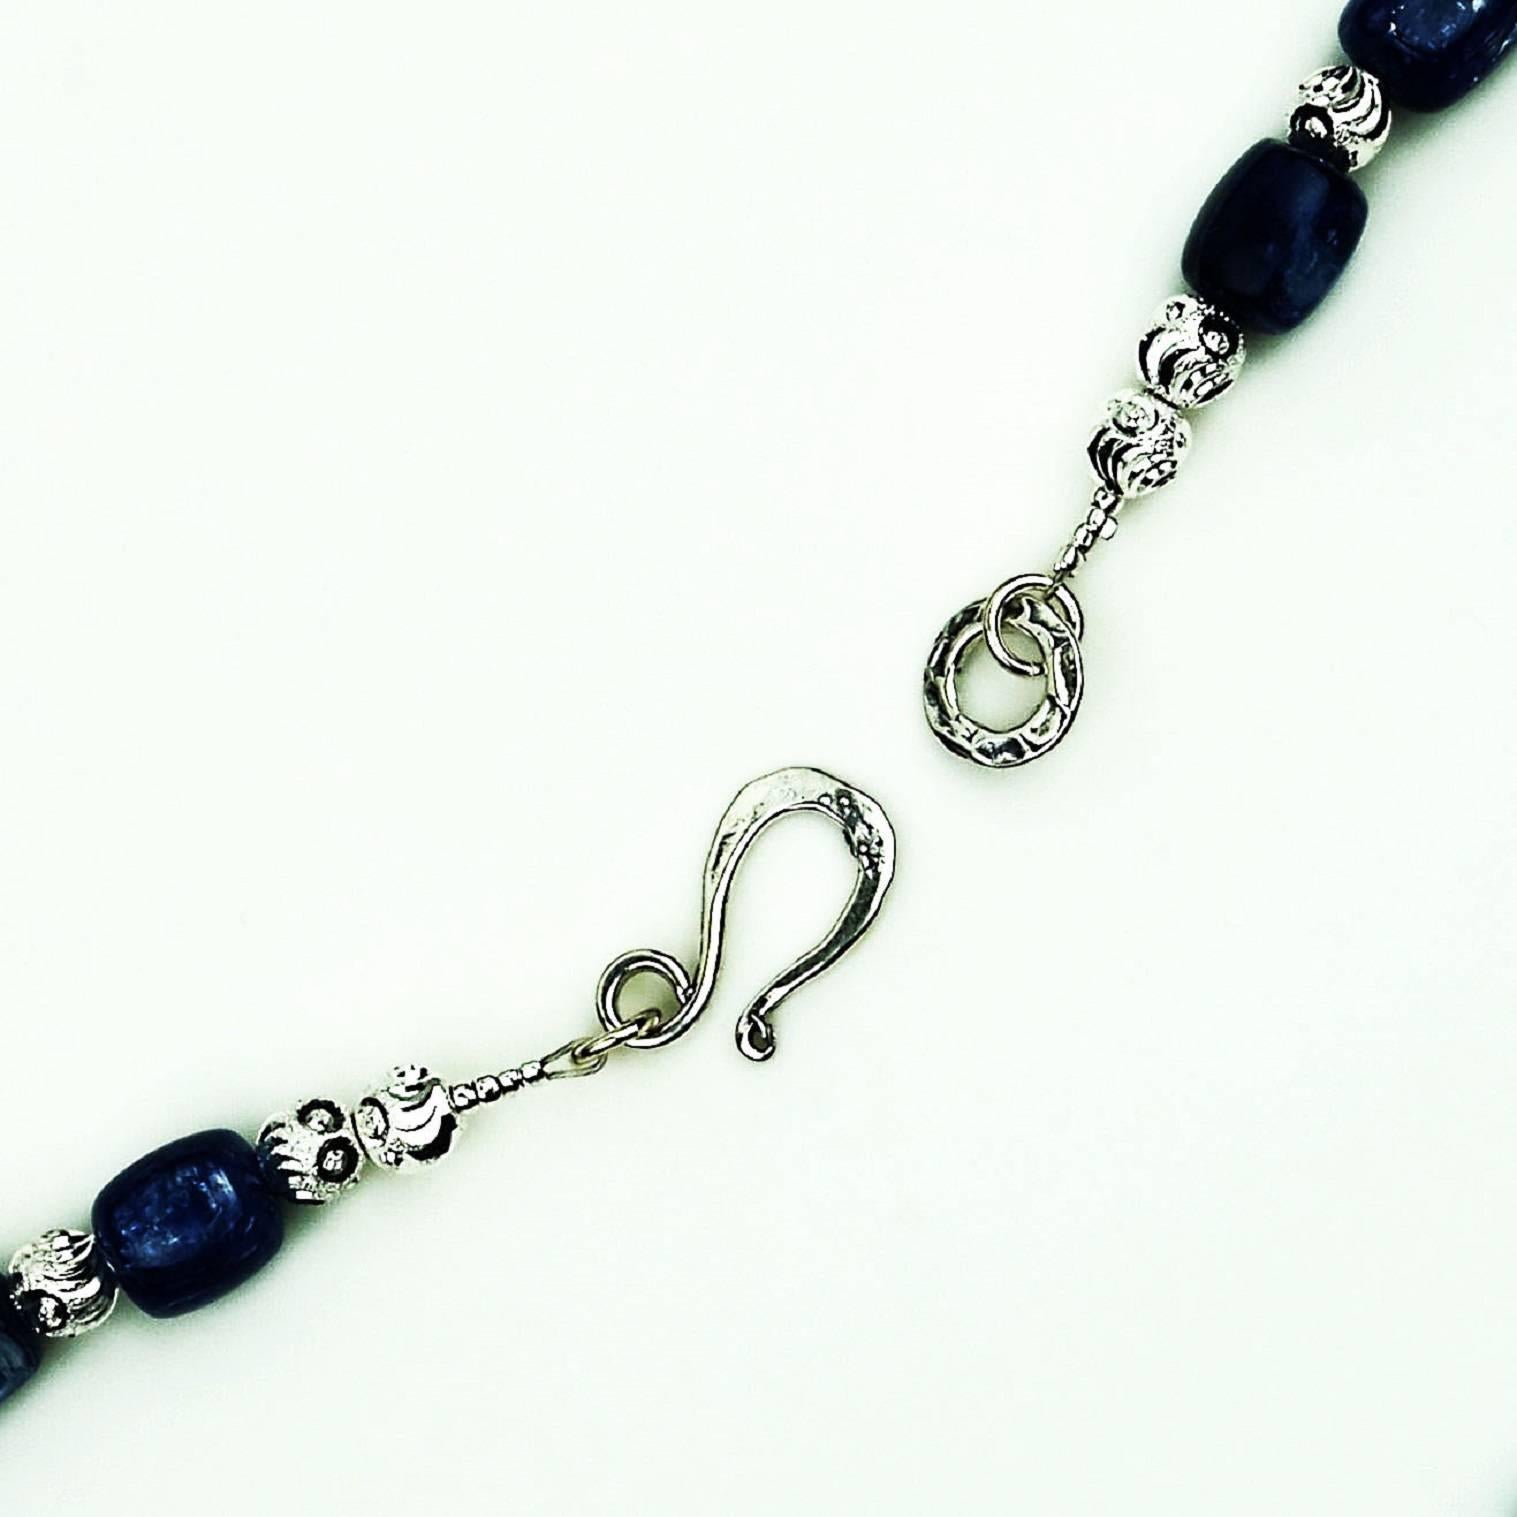 Women's or Men's Blue Kyanite and Silver Necklace